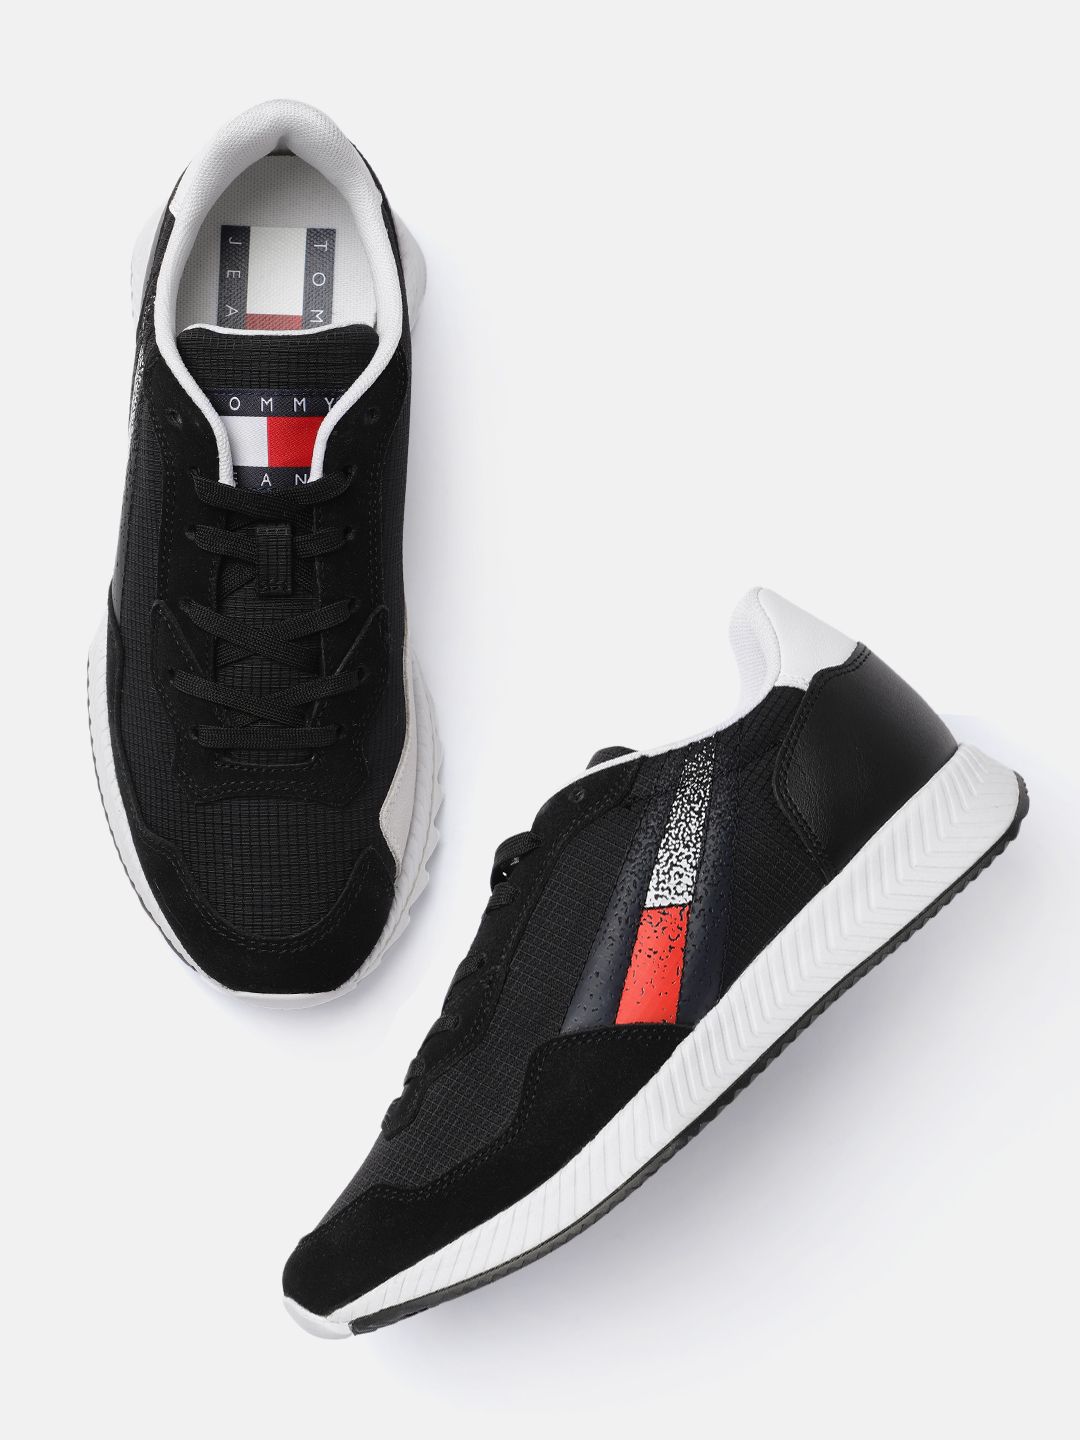 Tommy Hilfiger Women Black Suede Sneakers Price in India